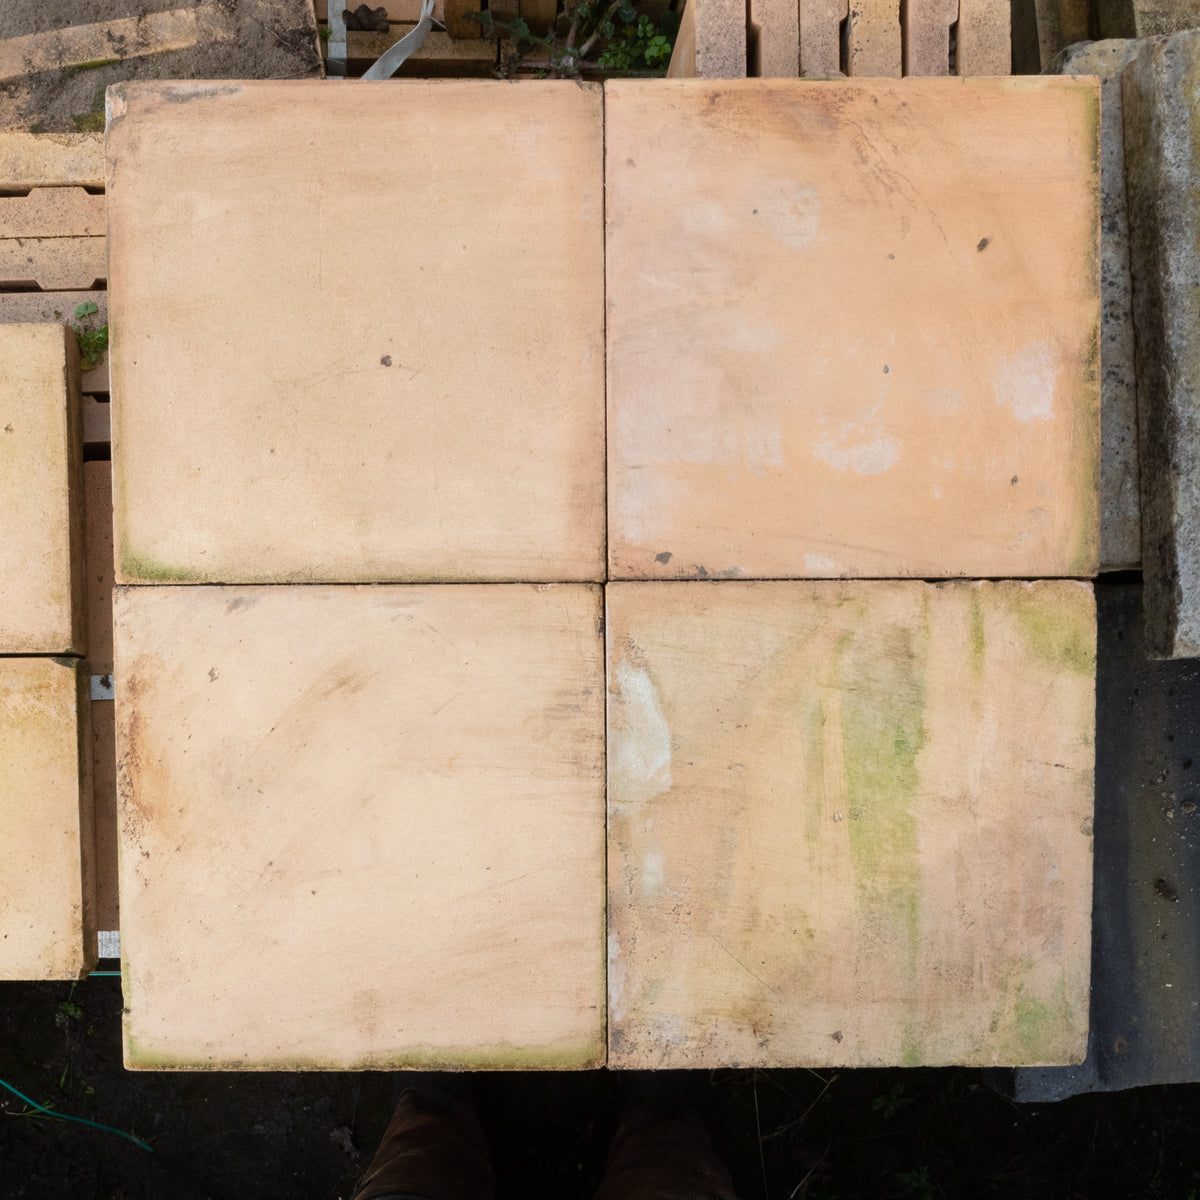 Reclaimed Buffed Terracotta Tiles | 4 square meter batch | The Architectural Forum